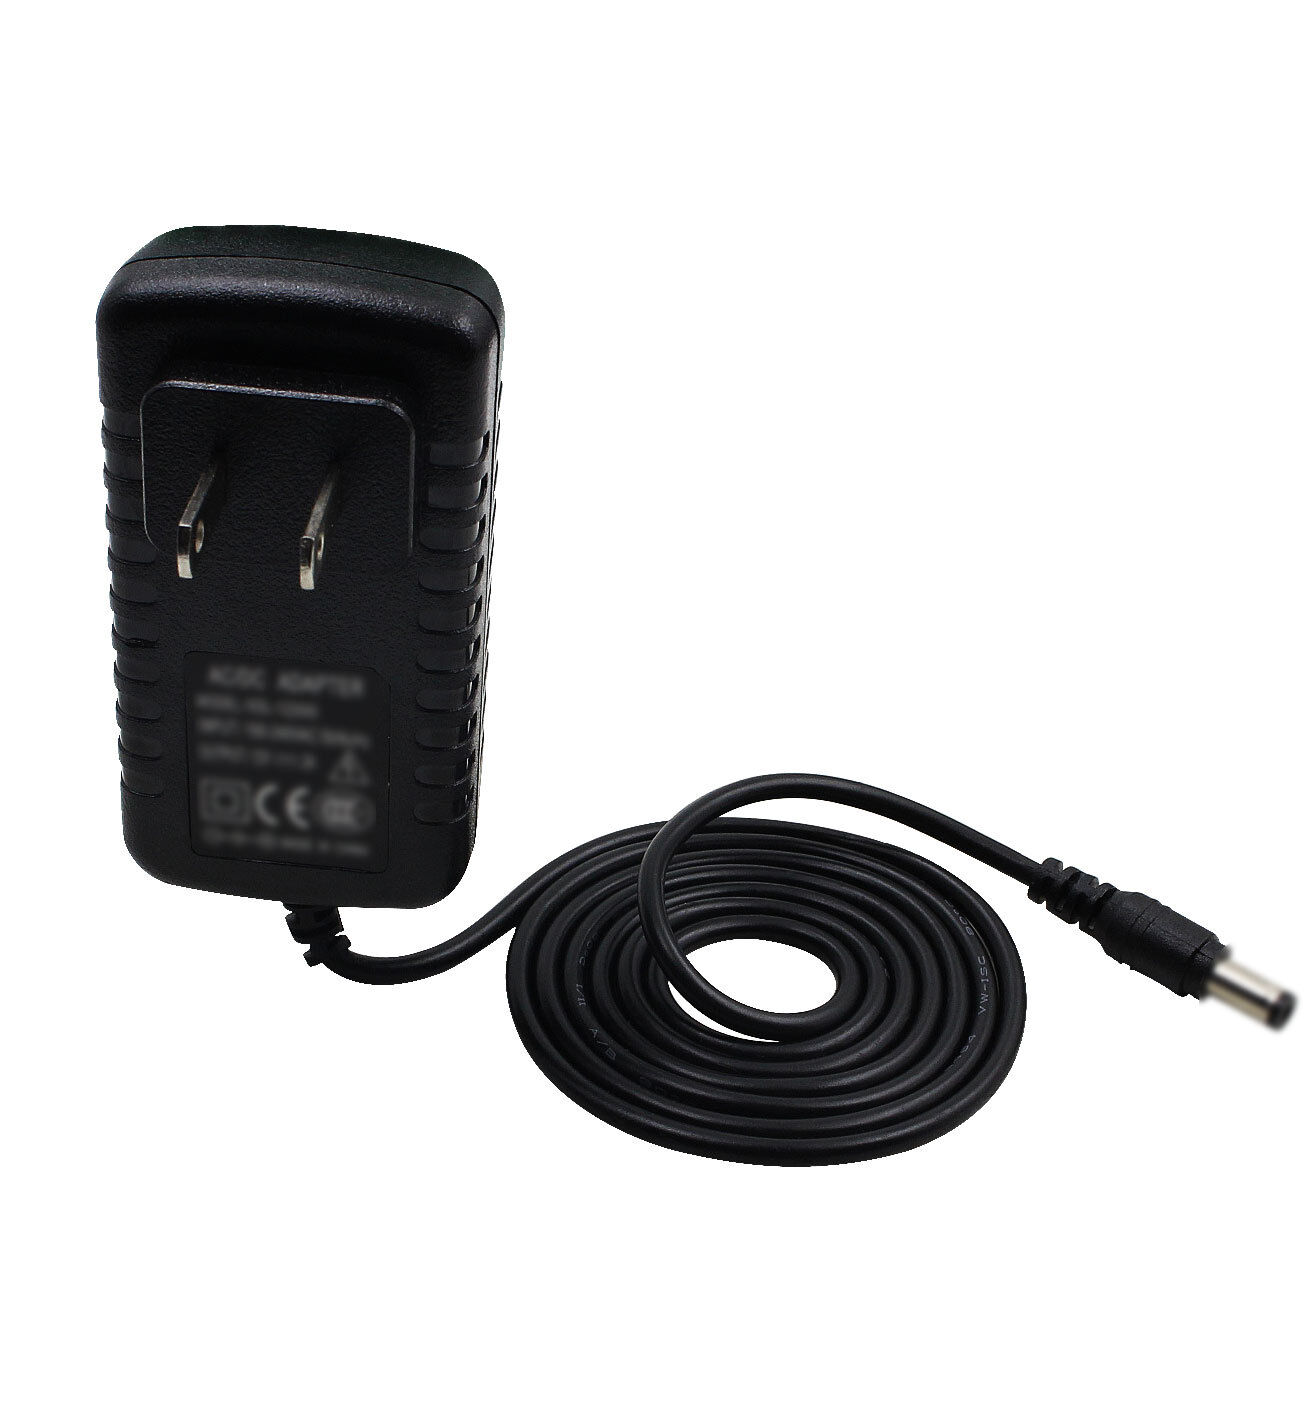 Power Supply Adapter Charger for Sony SRSXB40 SRS-XB40 Portable Wireless Speaker Package includes: 1x Power Adapter (